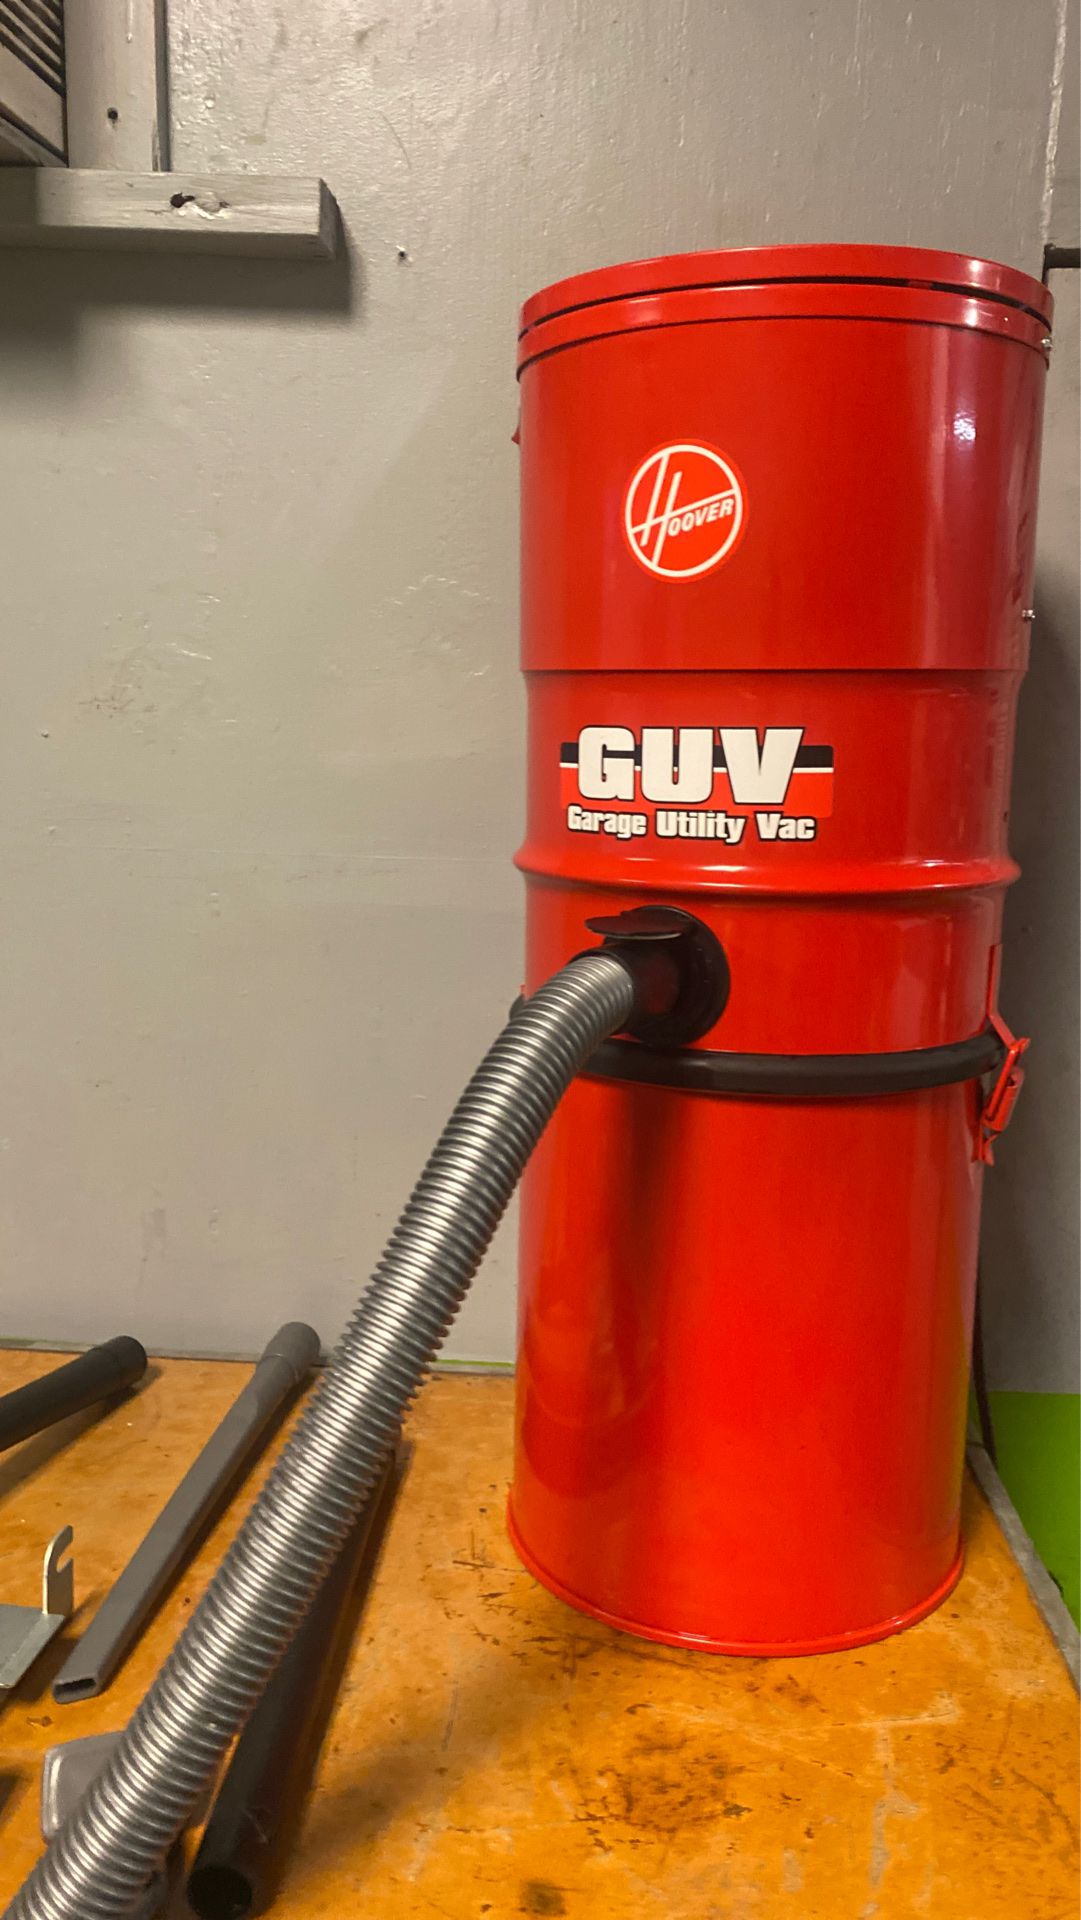 Hoover commercial vacuum GUV